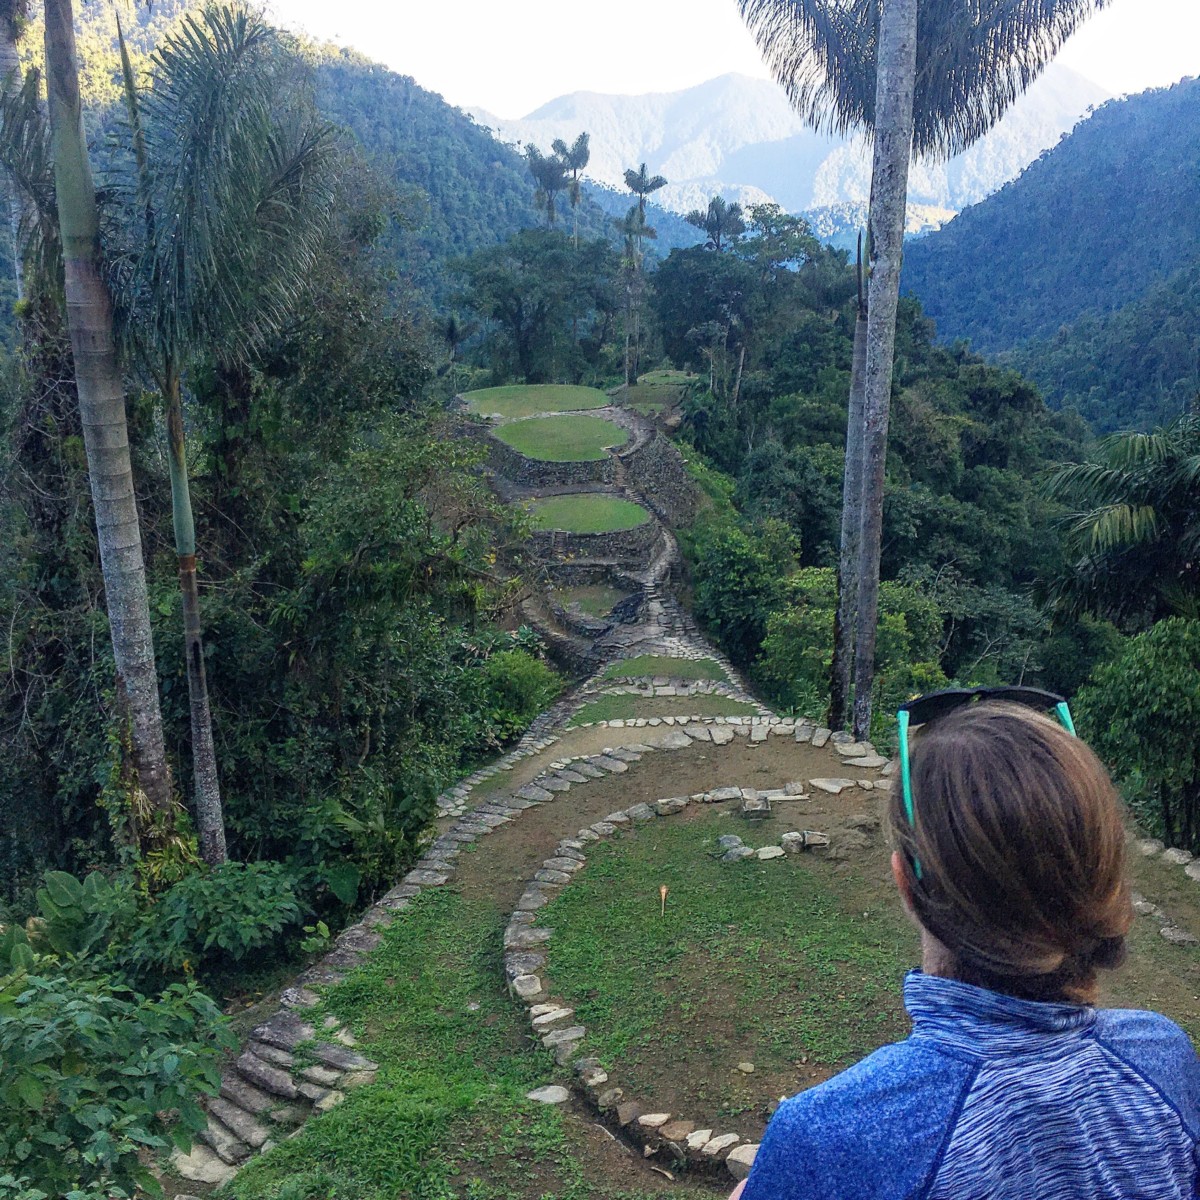 The back of Anny Wooldridge's head while she looks over a terraced area in the lost city of Columbia